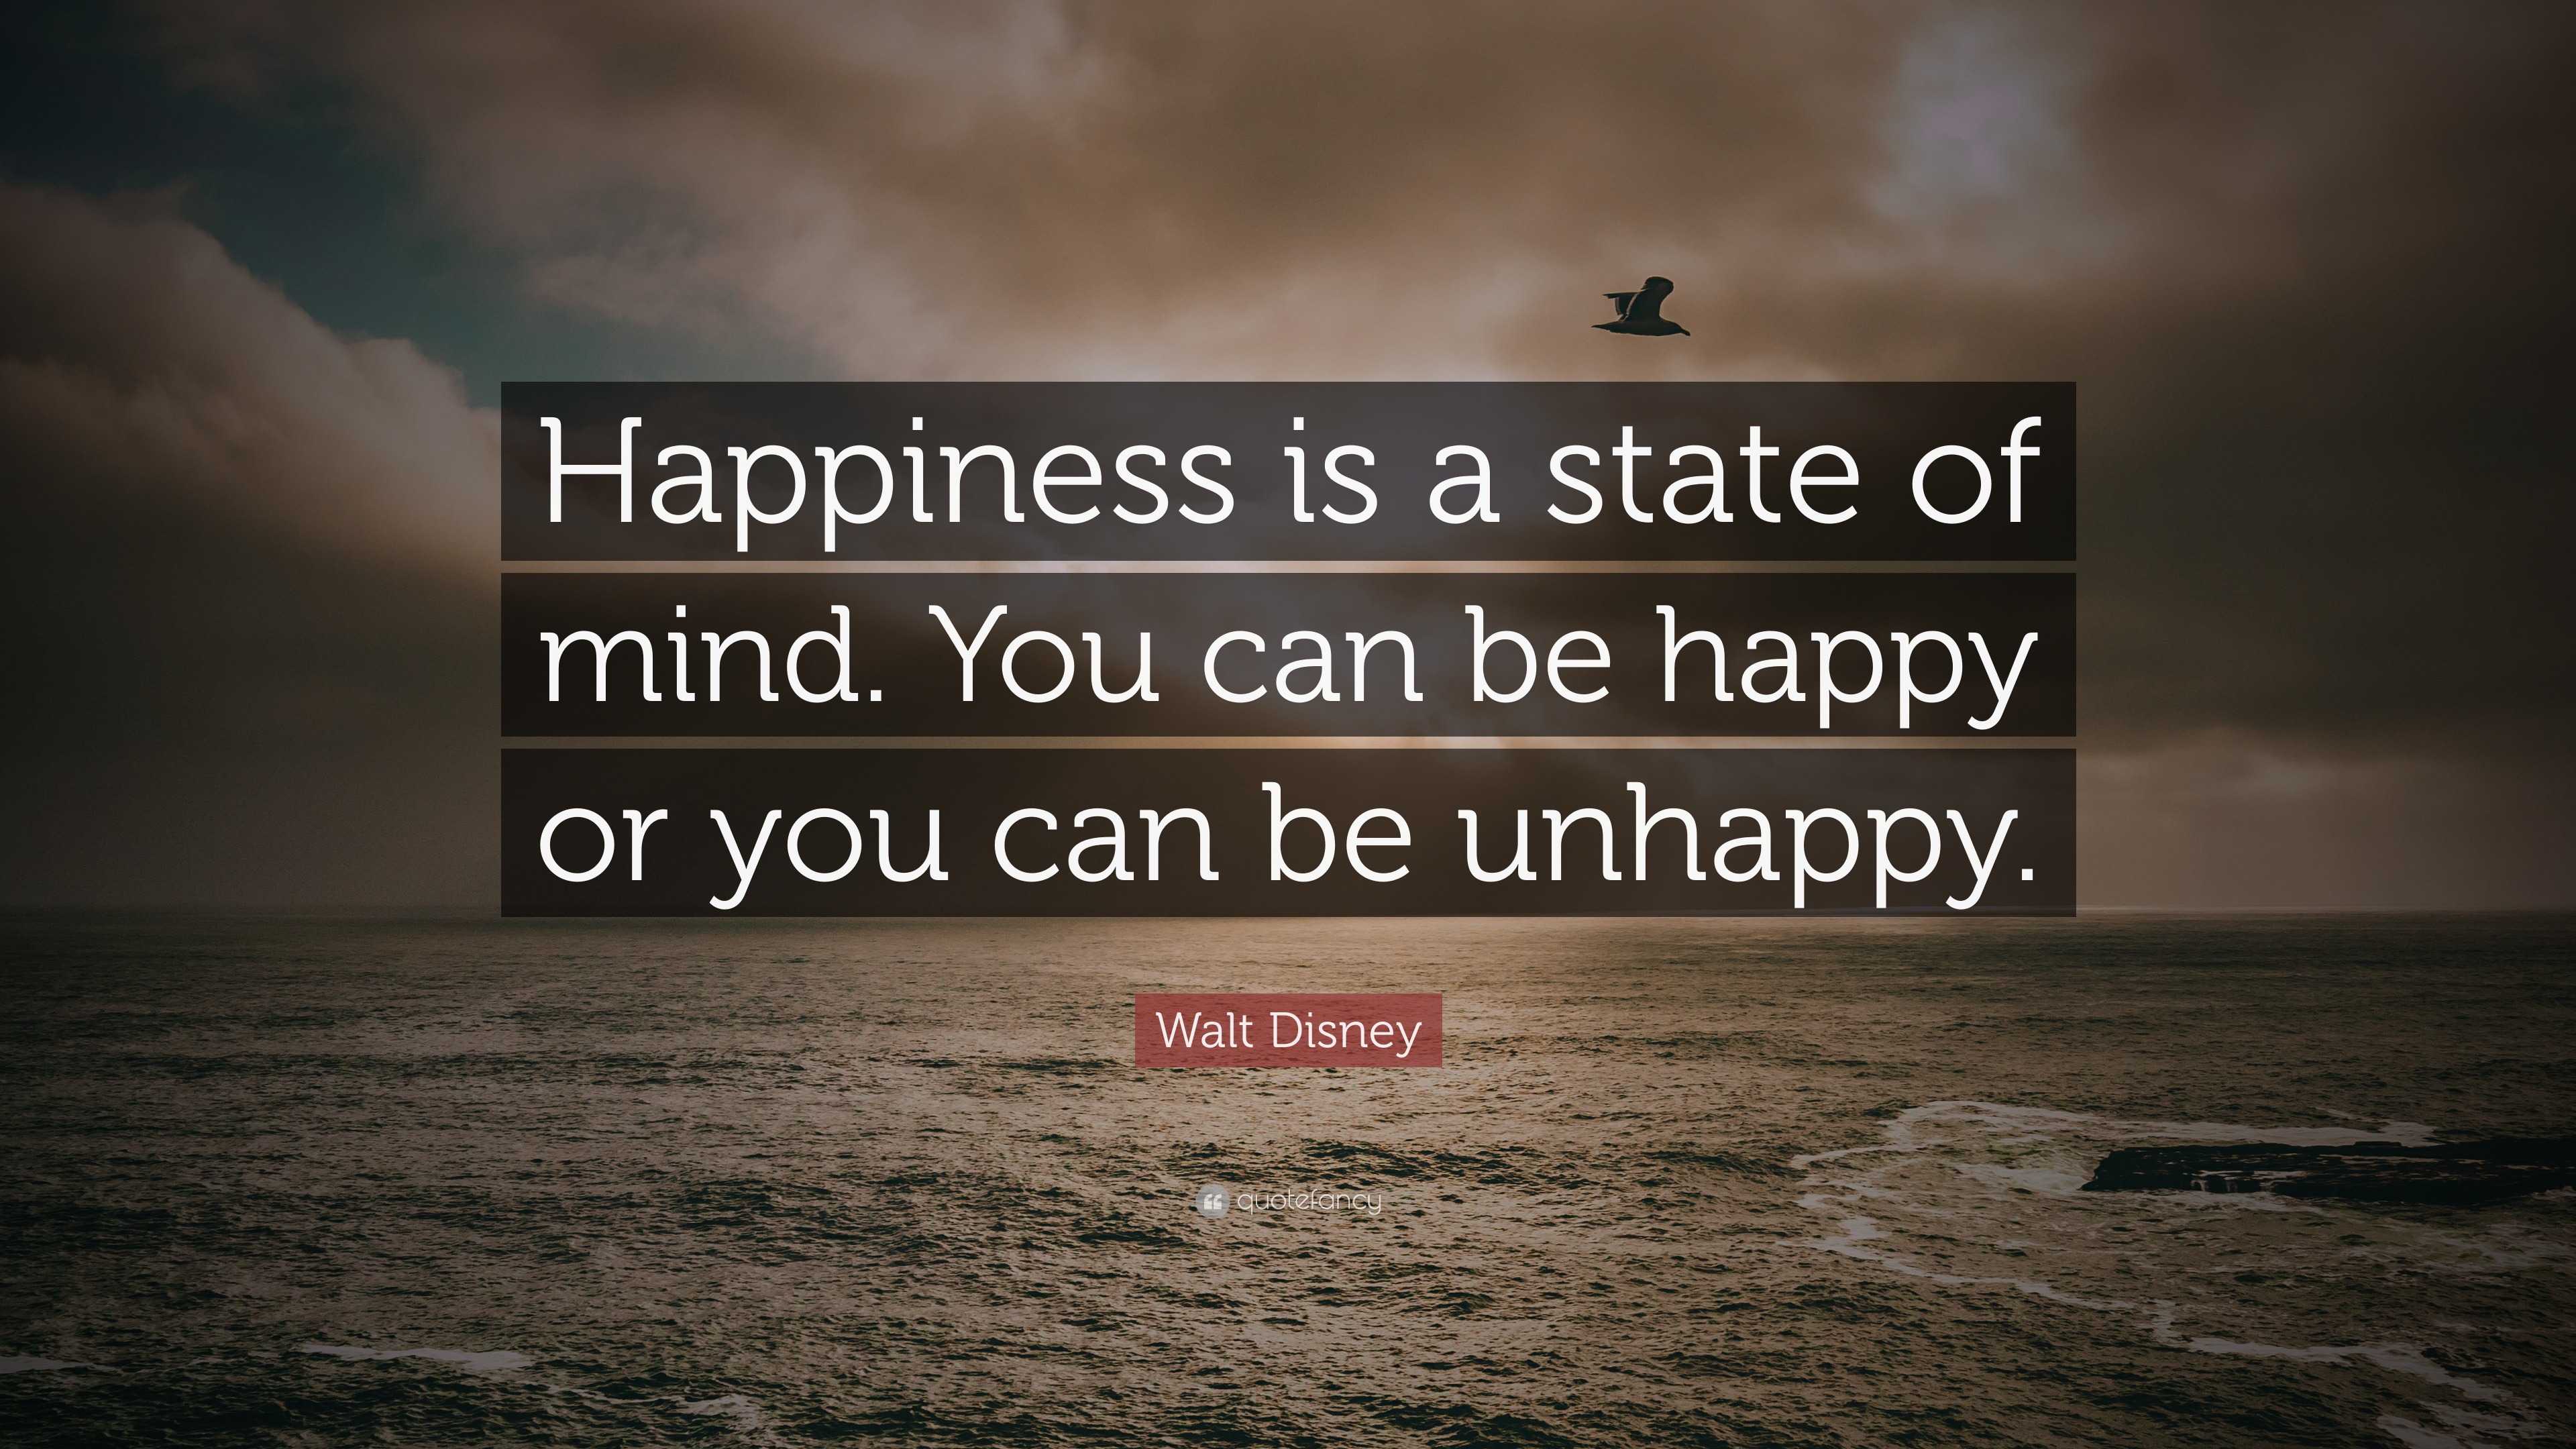 Walt Disney Quote: “Happiness is a state of mind. It's just according to  the way you